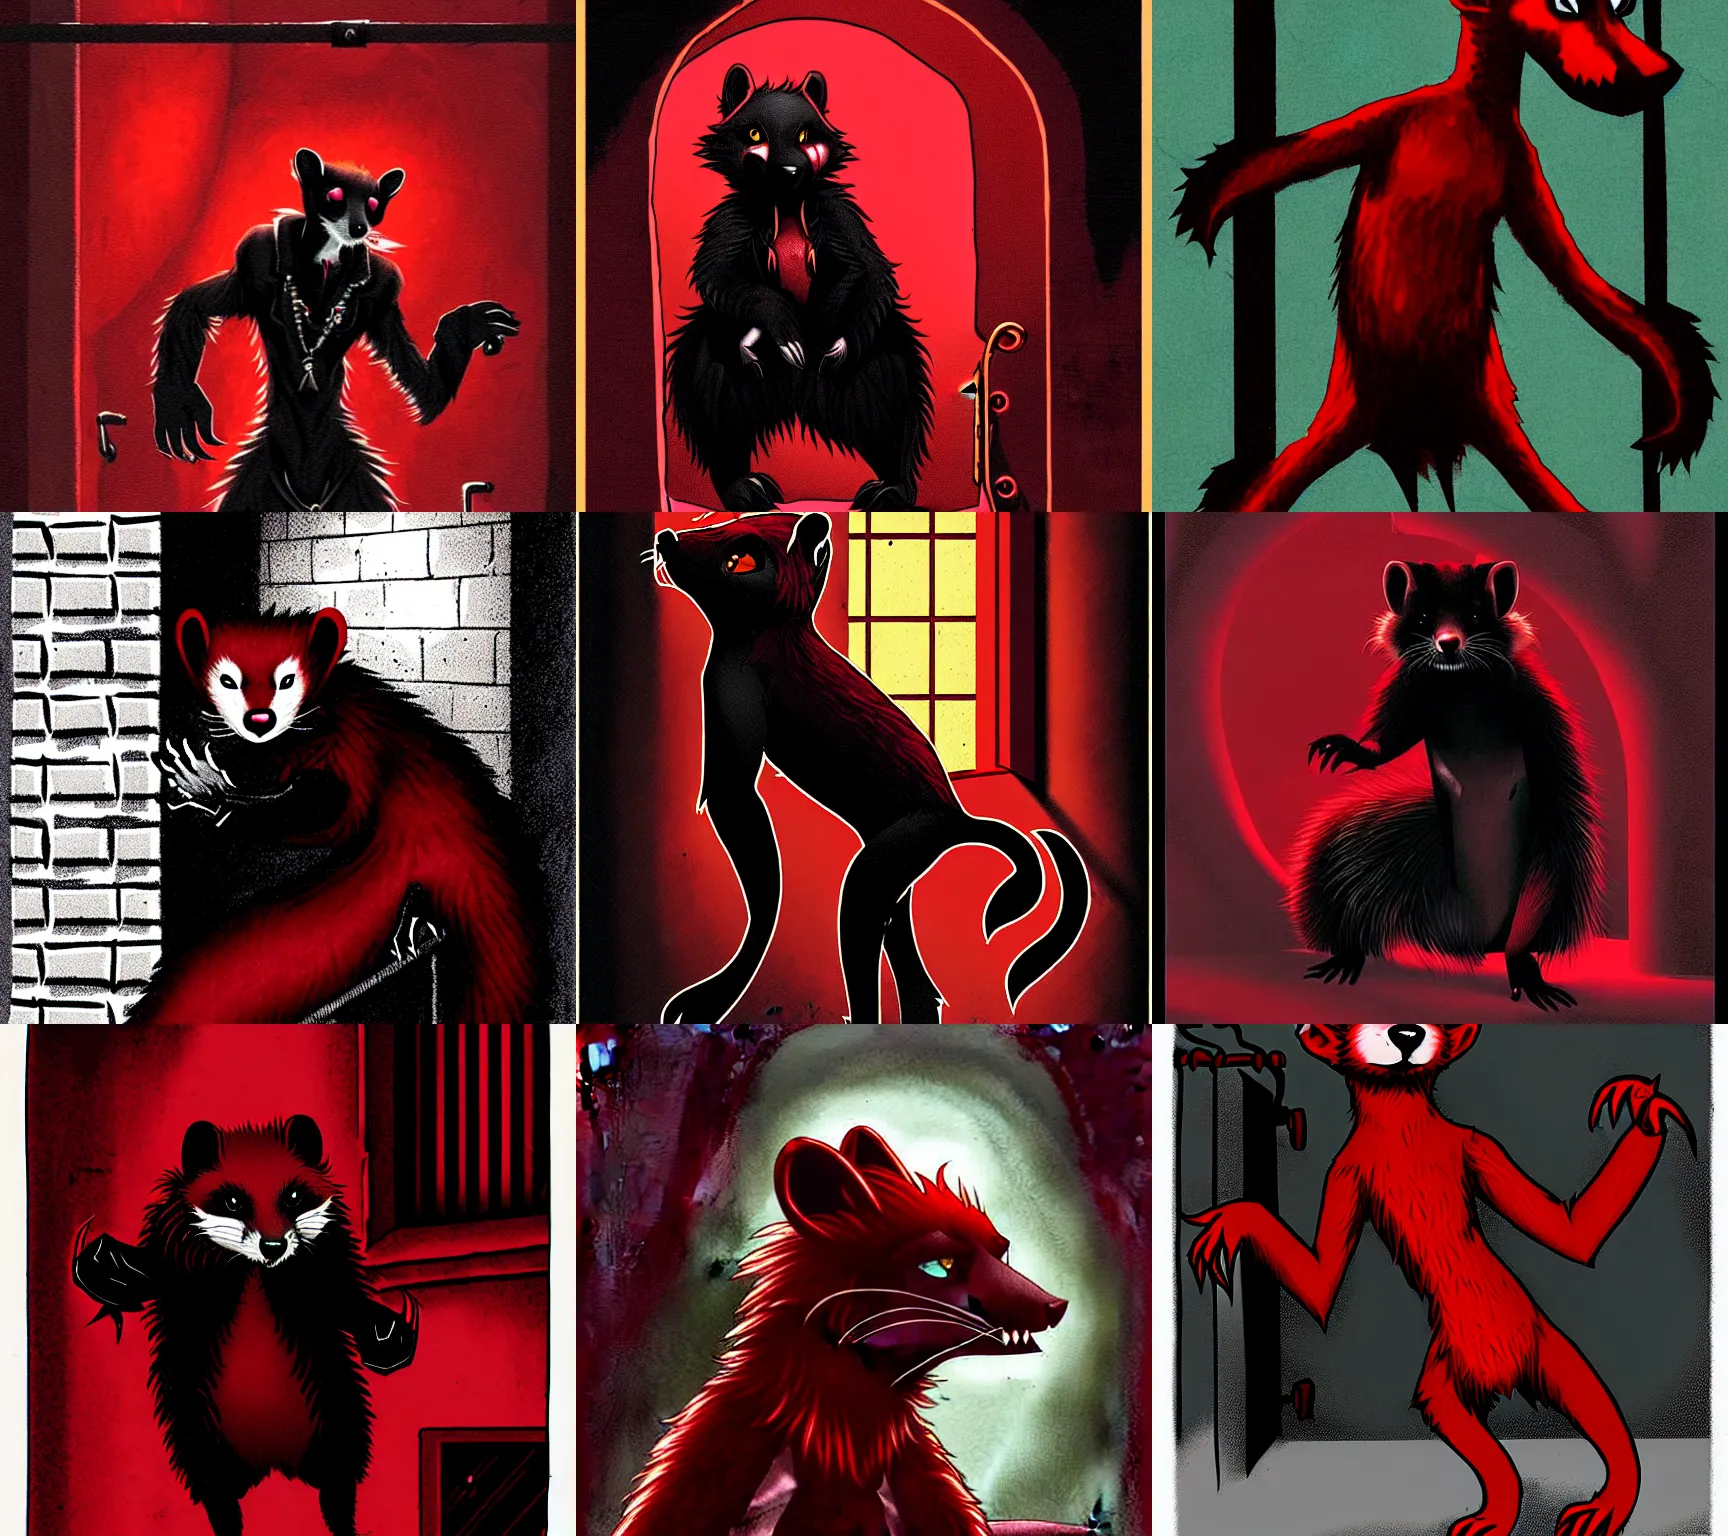 Prompt: vampire : the masquerade ( world of darkness ) source book illustration of an anthropomorphic red - black furry weasel - ferret - stoat fursona ( from the furry fandom ) in prisoner's regalia, in a prison cell, scratching at the walls